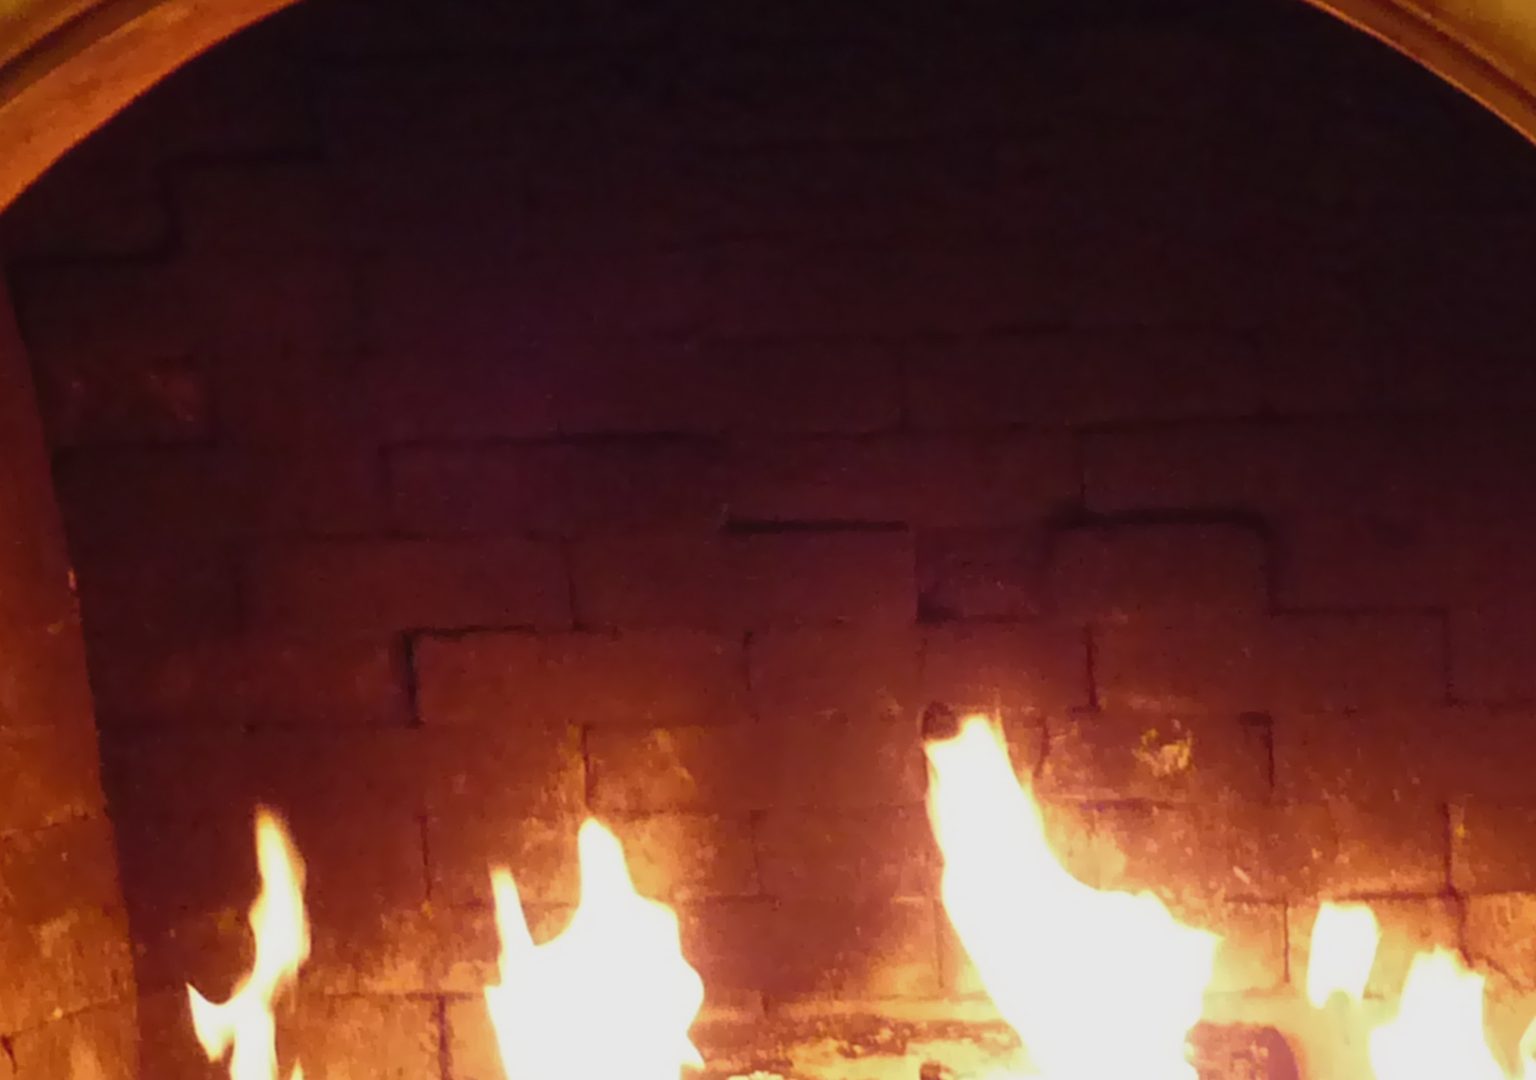 Close-up of fireplace with fire burning